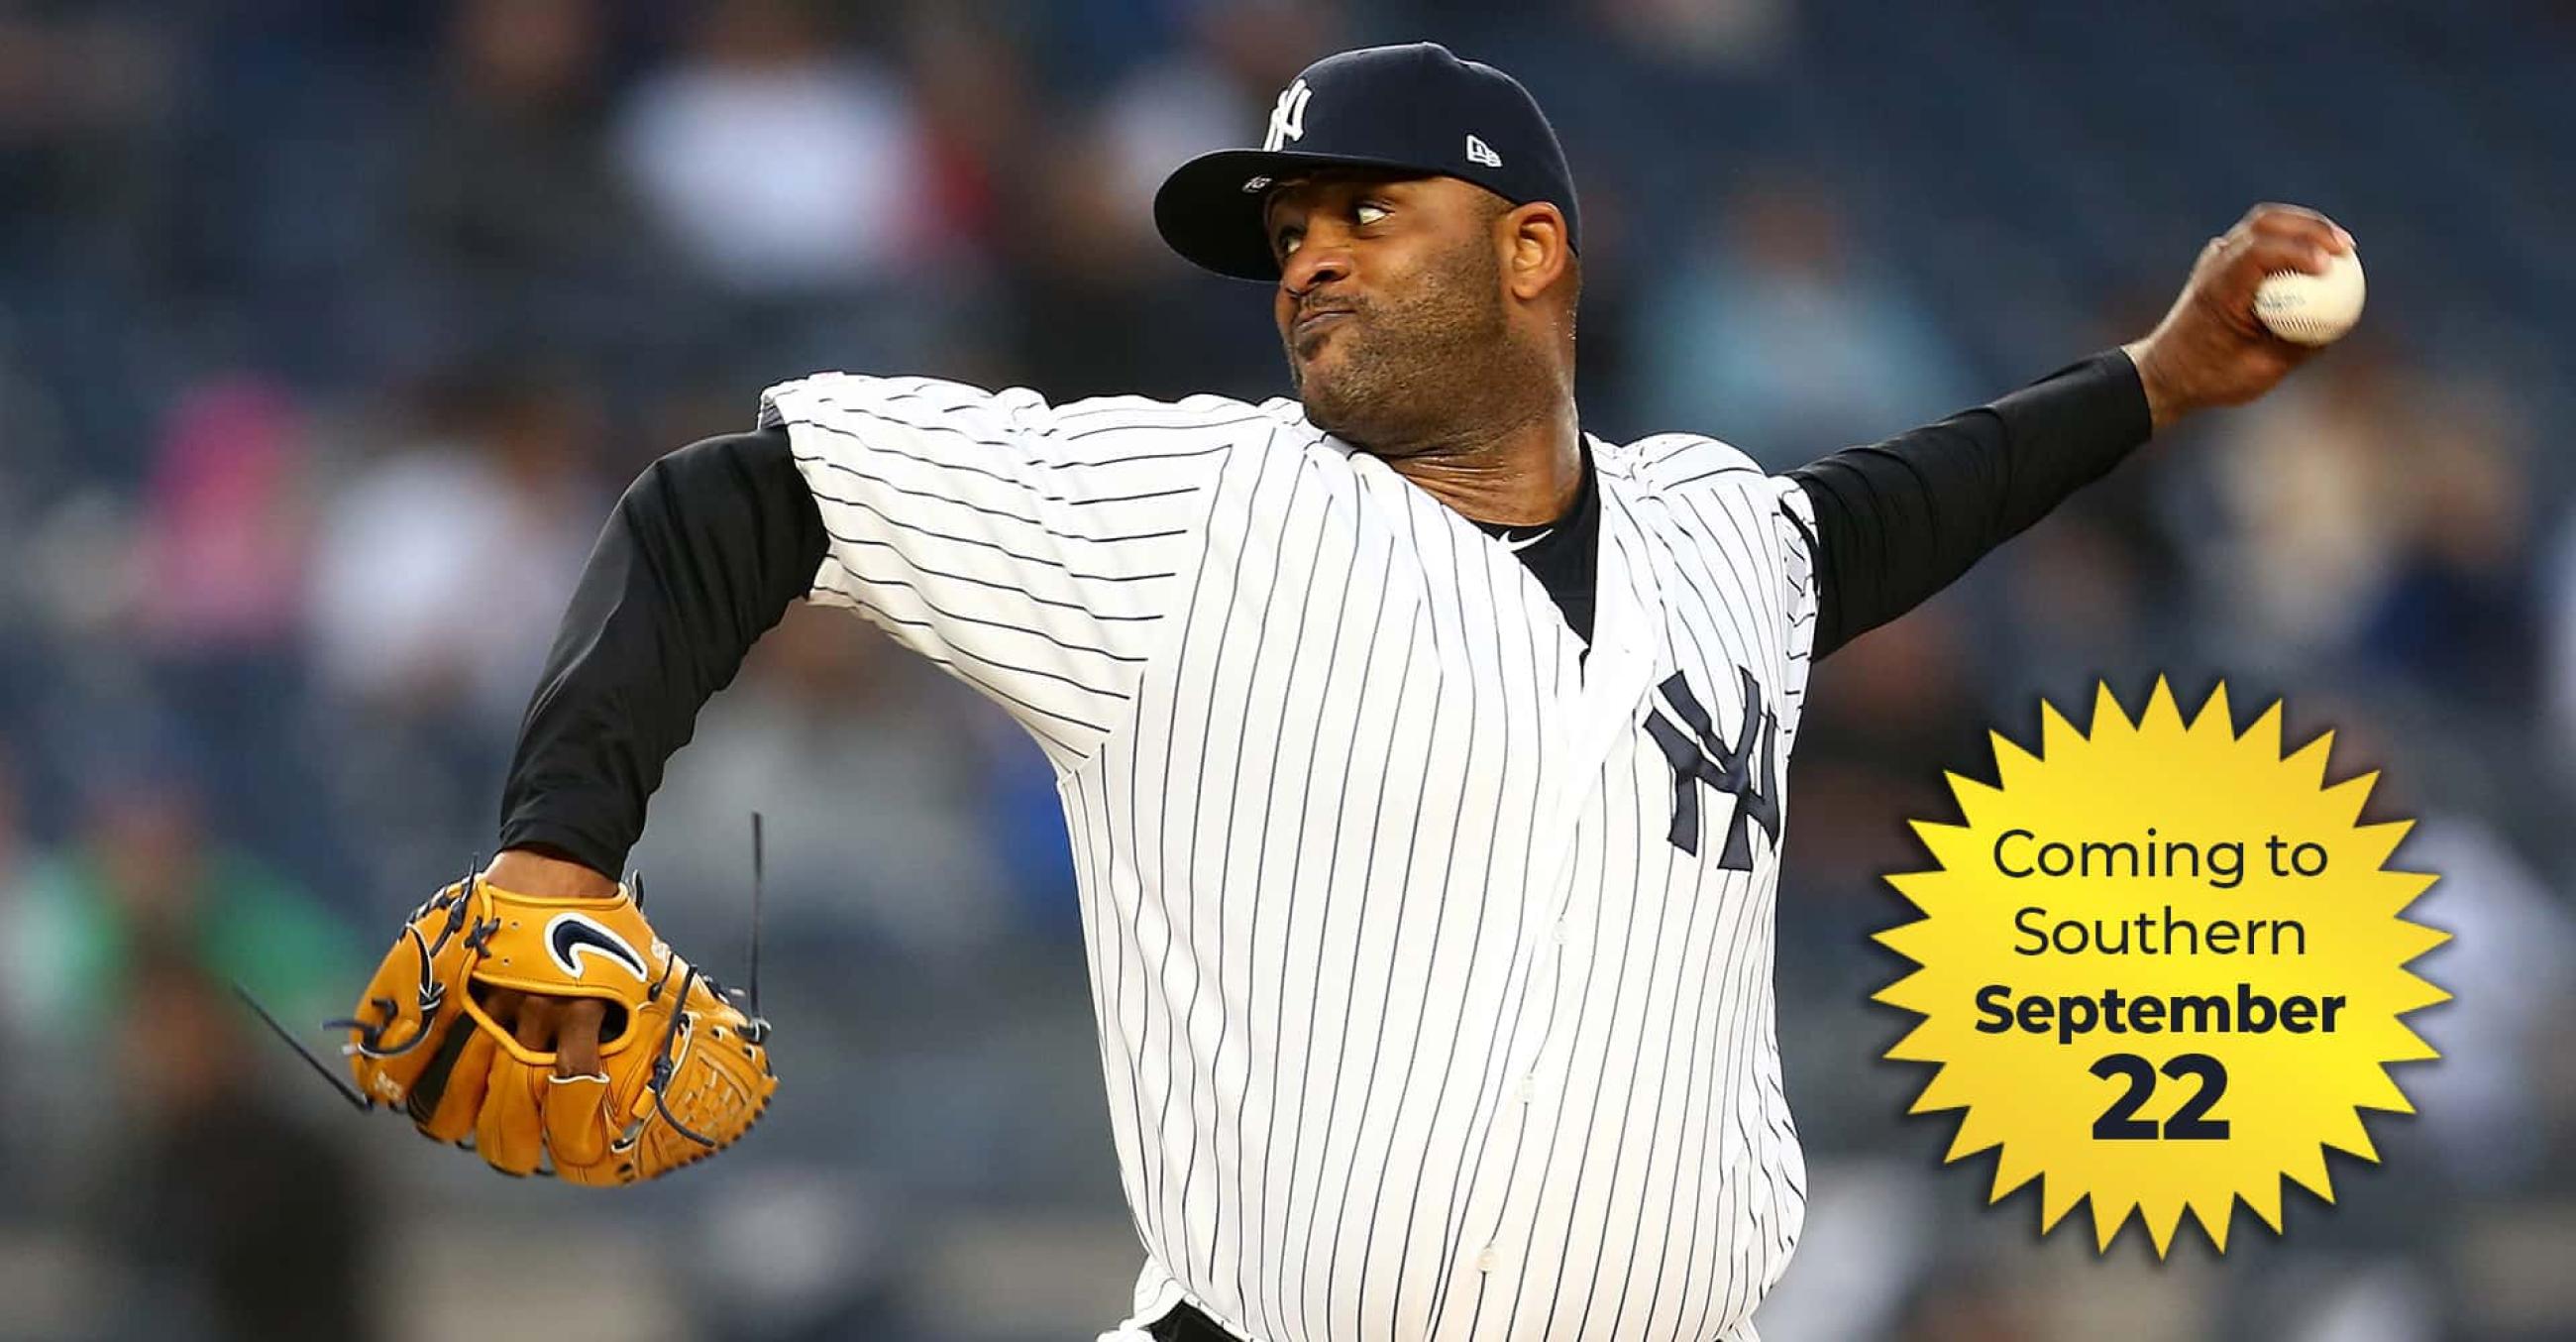 retired NY Yankees pitcher CC Sabathia winds up to pitch a ball